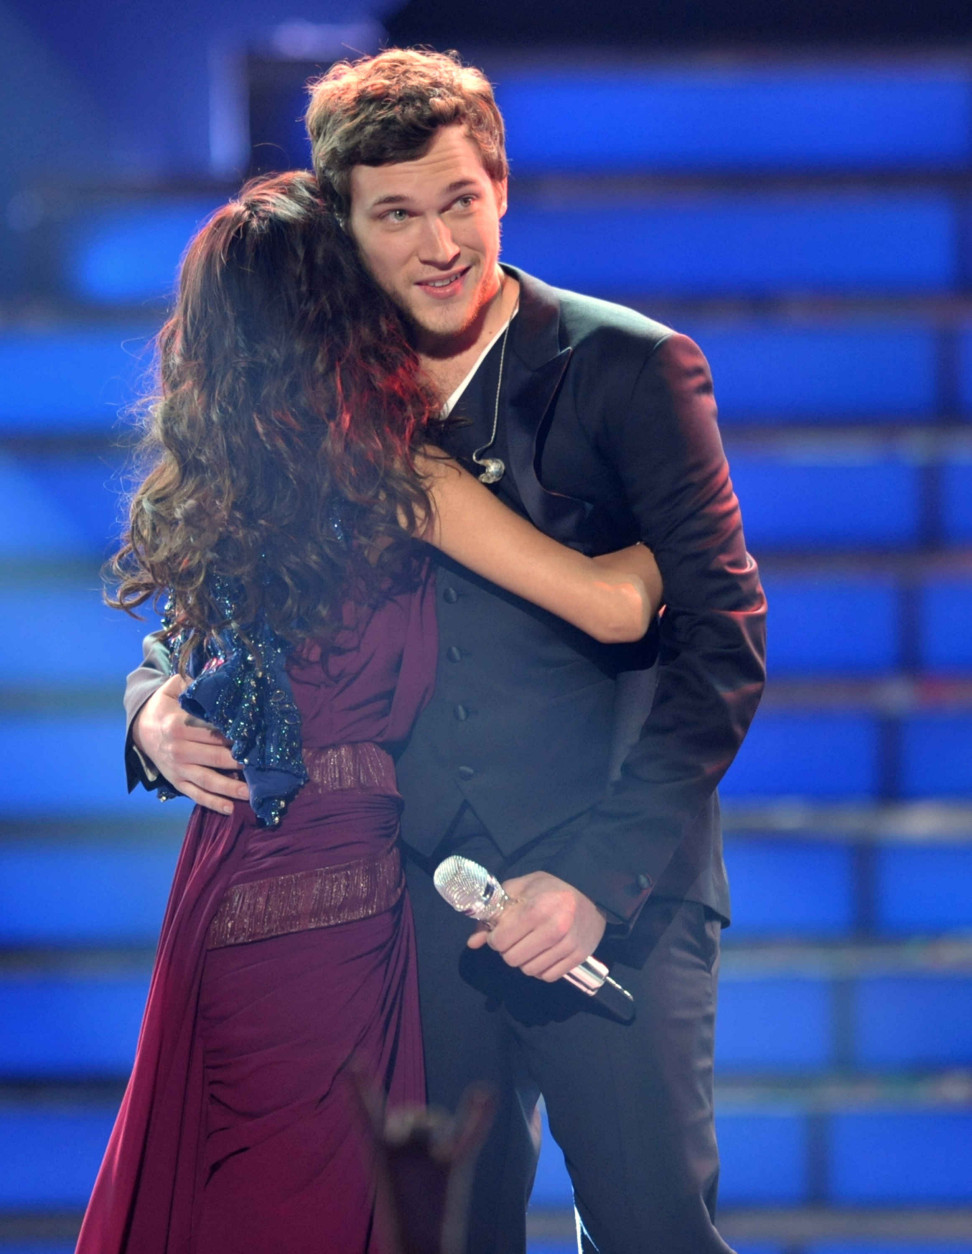 Runner-up Jessica Sanchez, left, congratulates winner Phillip Phillips onstage at the "American Idol" finale on Wednesday, May 23, 2012 in Los Angeles. (Photo by John Shearer/Invision/AP)